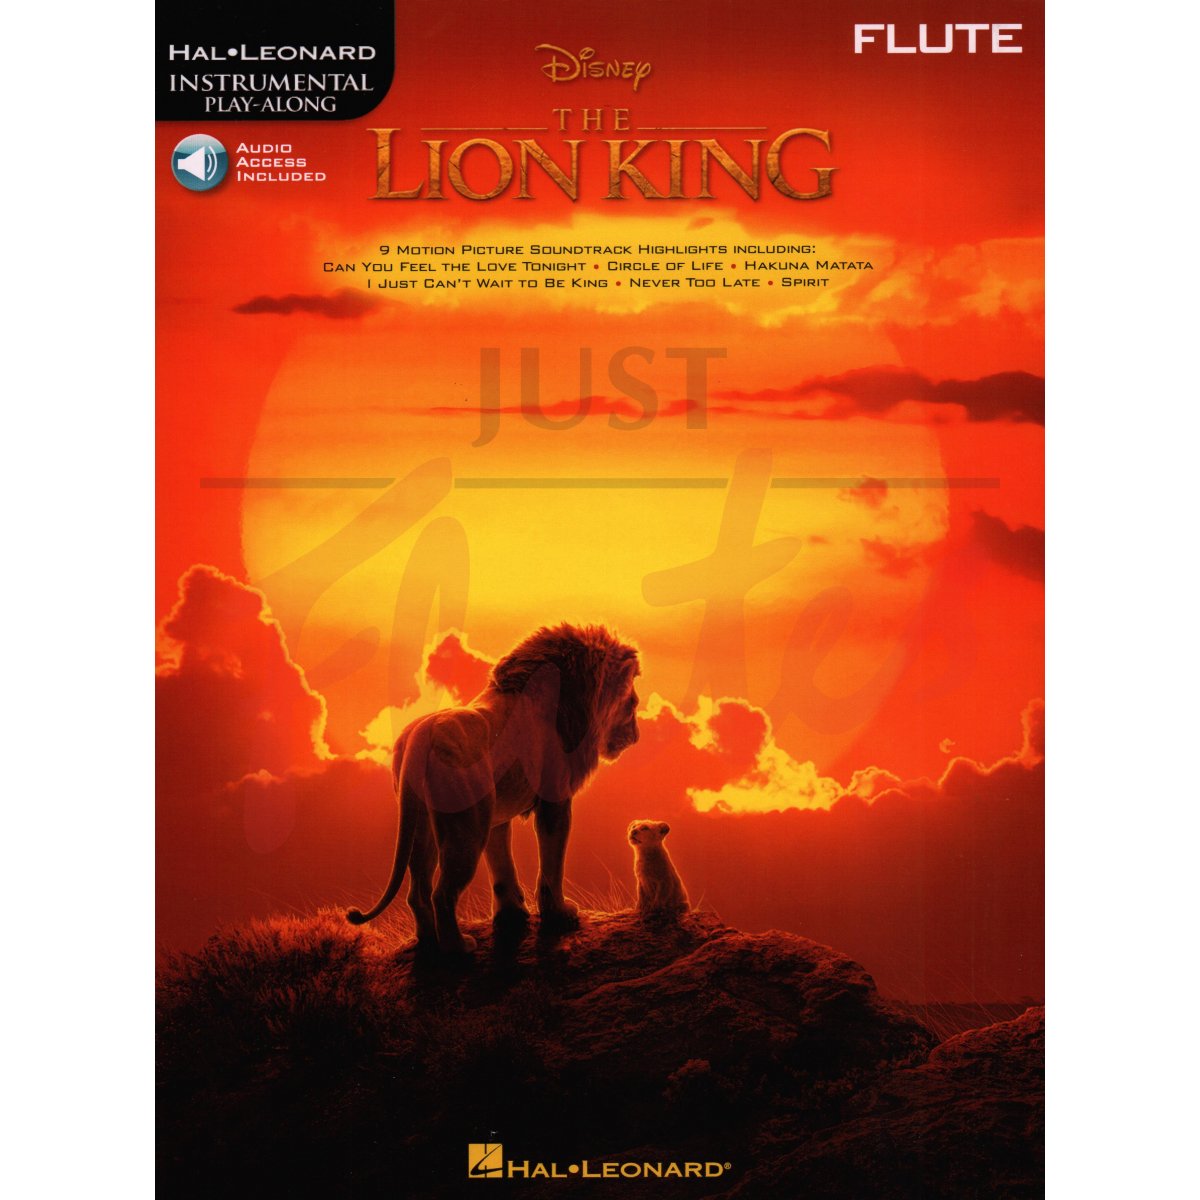 The Lion King Play-Along for Flute